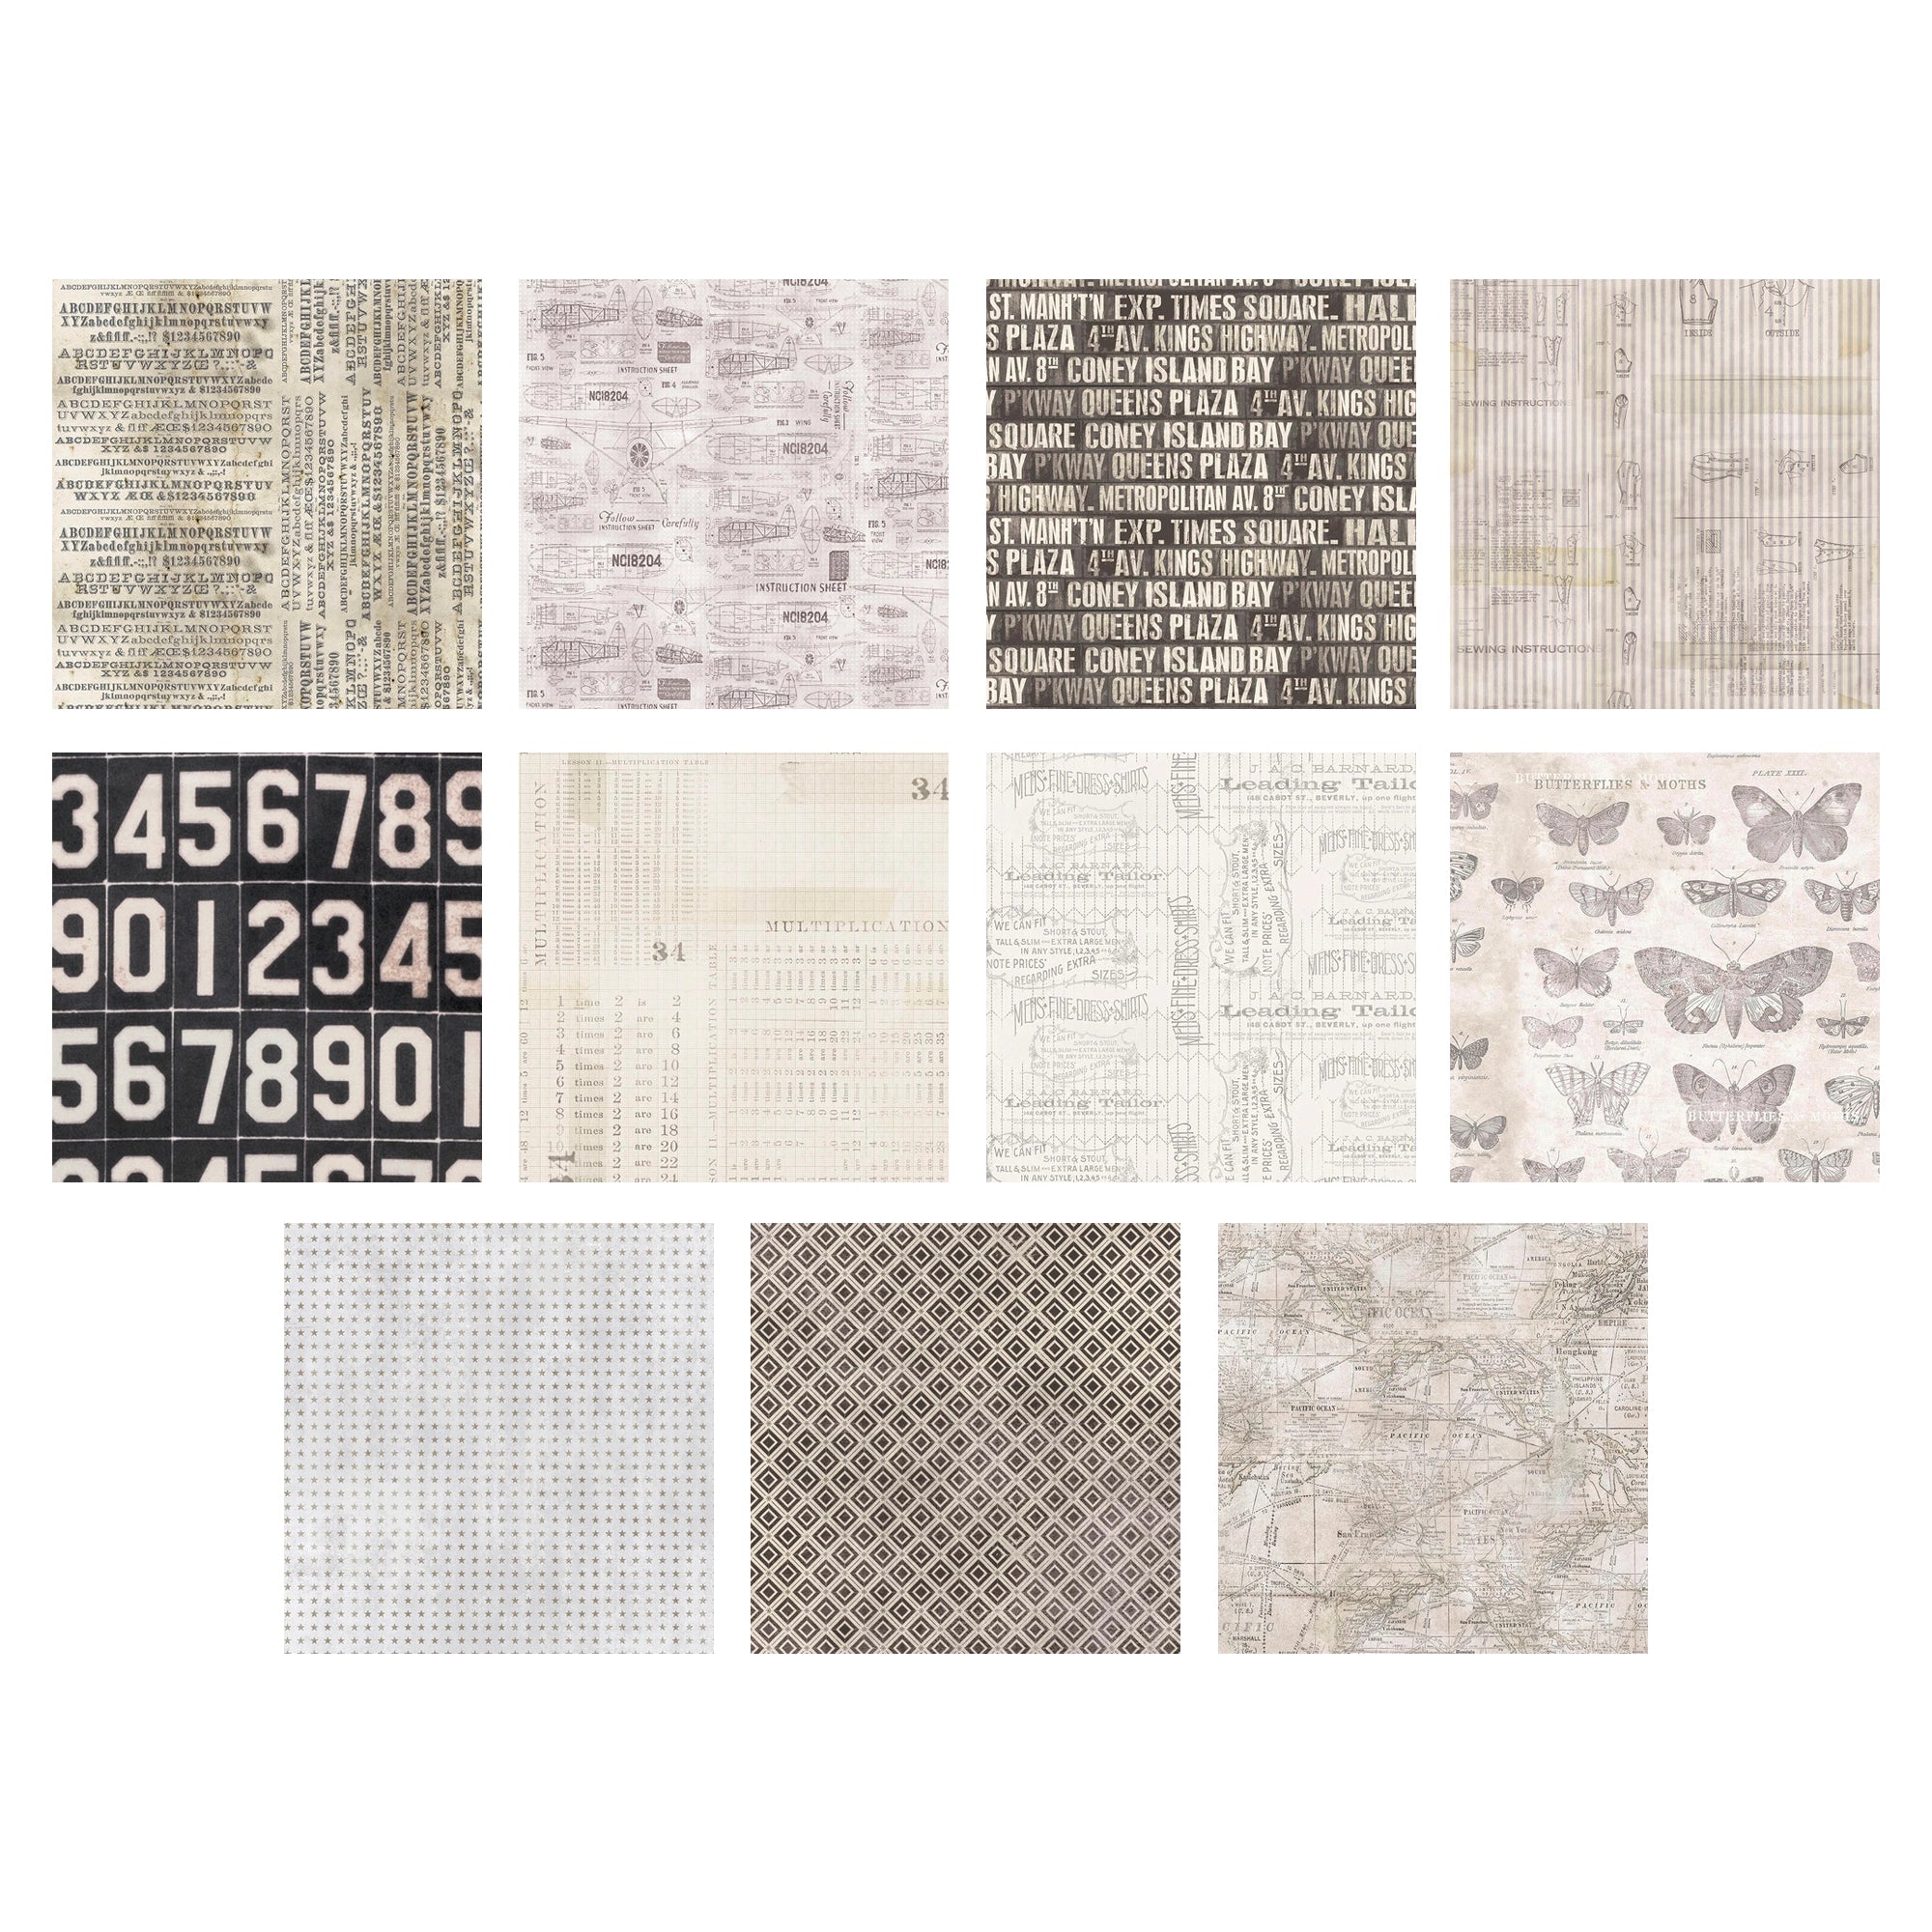 Idea-Ology by Tim Holtz - [TH94230] Linen Tape - Patchwork